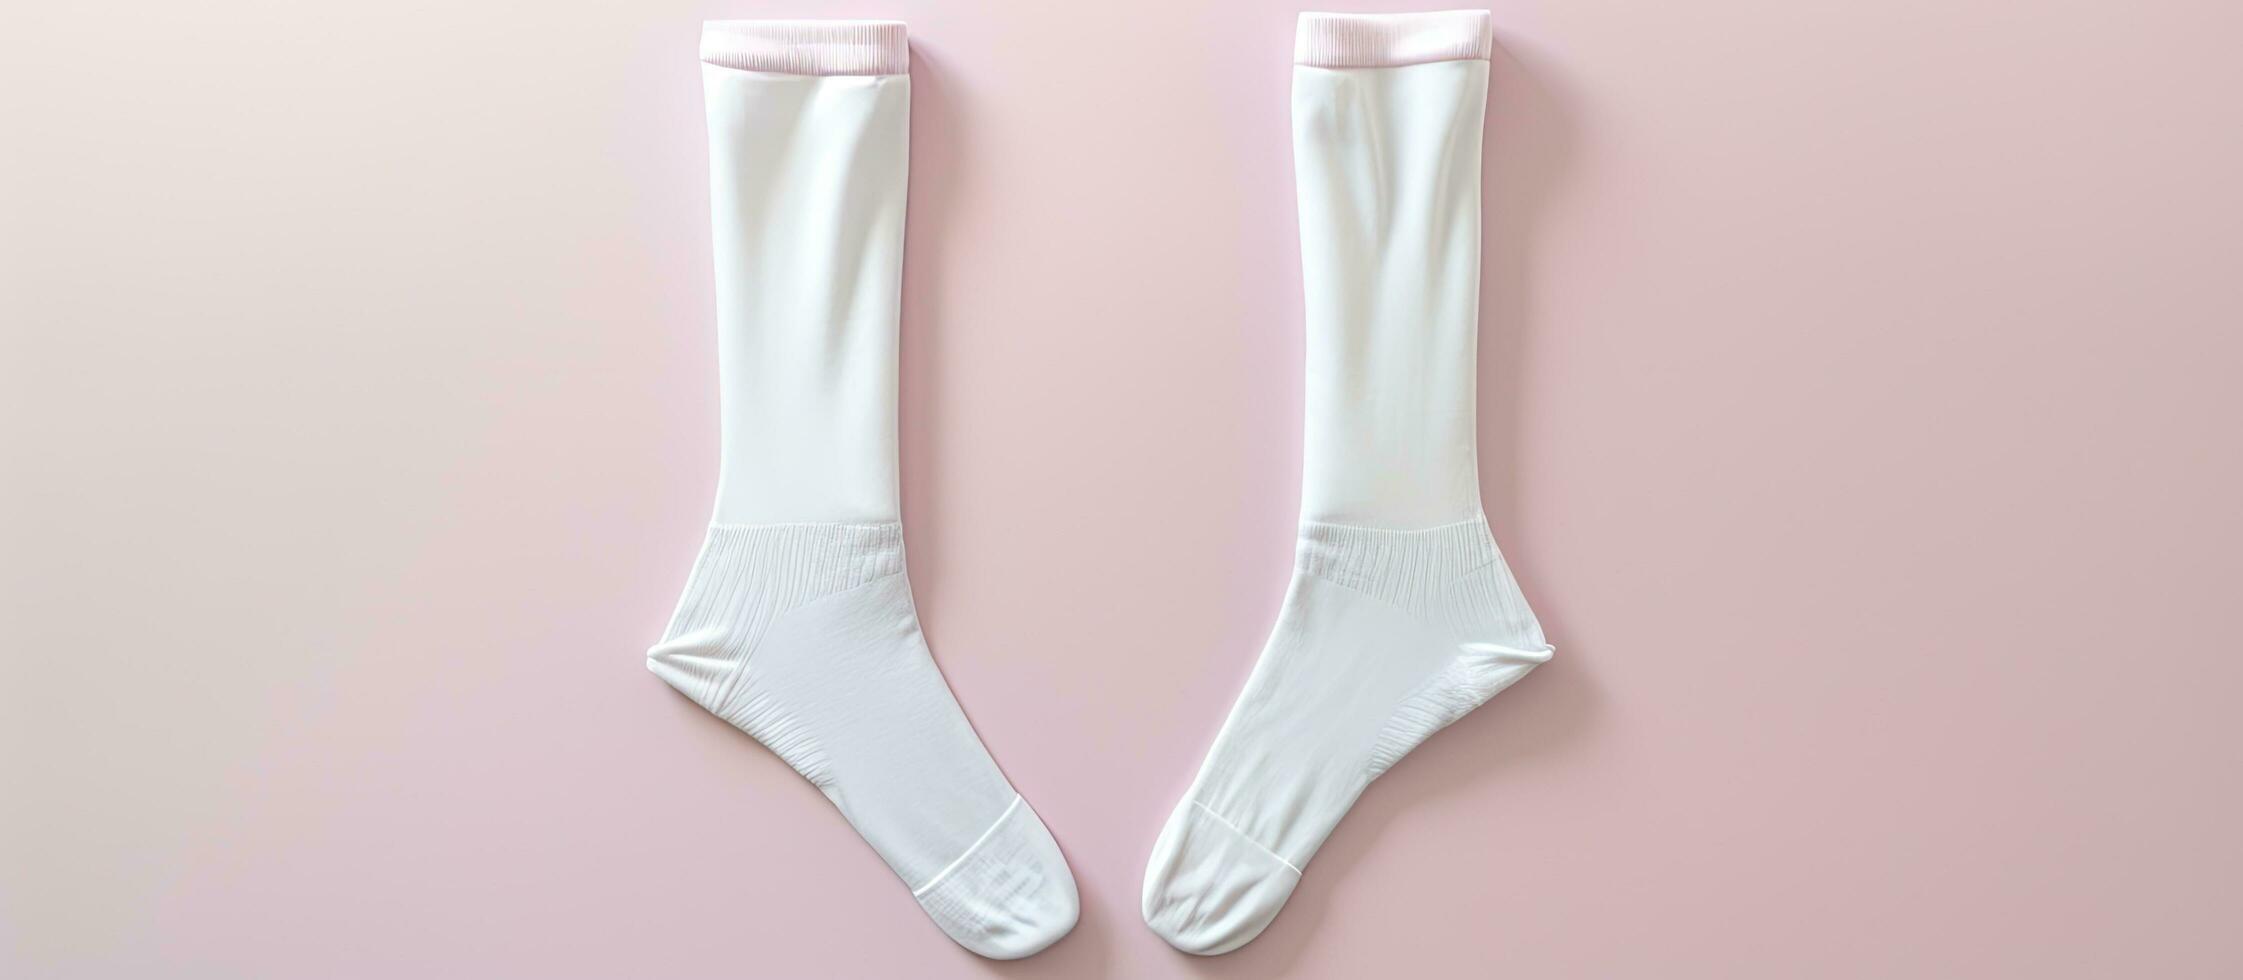 Photo of a pair of white socks on a pink background with blank space for text or design with copy space